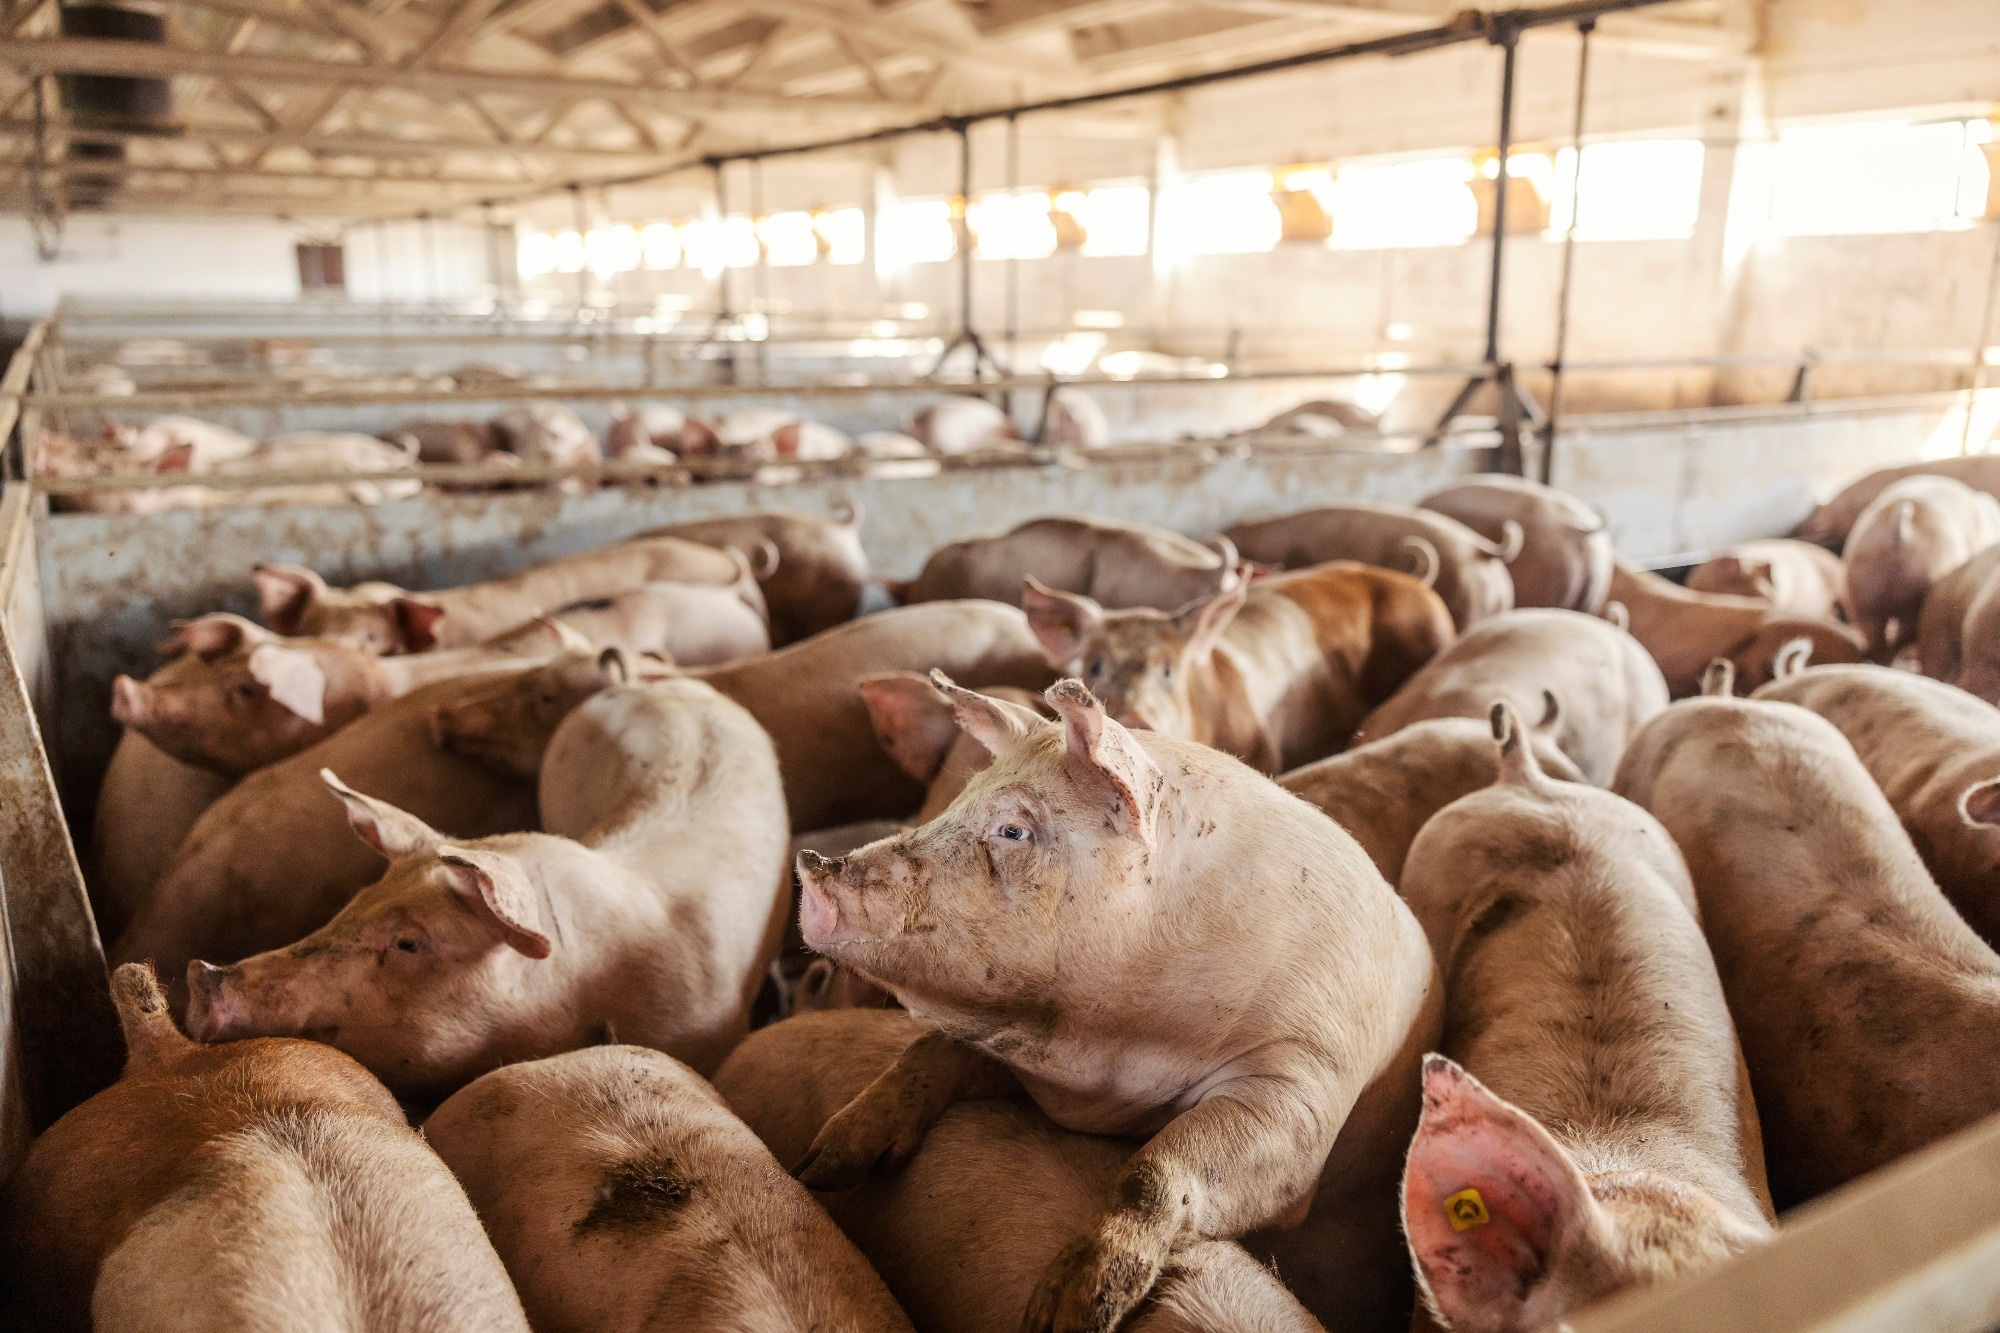 Study: The emergence and diversification of a zoonotic pathogen from within the microbiota of intensively farmed pigs. Image Credit: Dusan Petkovic / Shutterstock